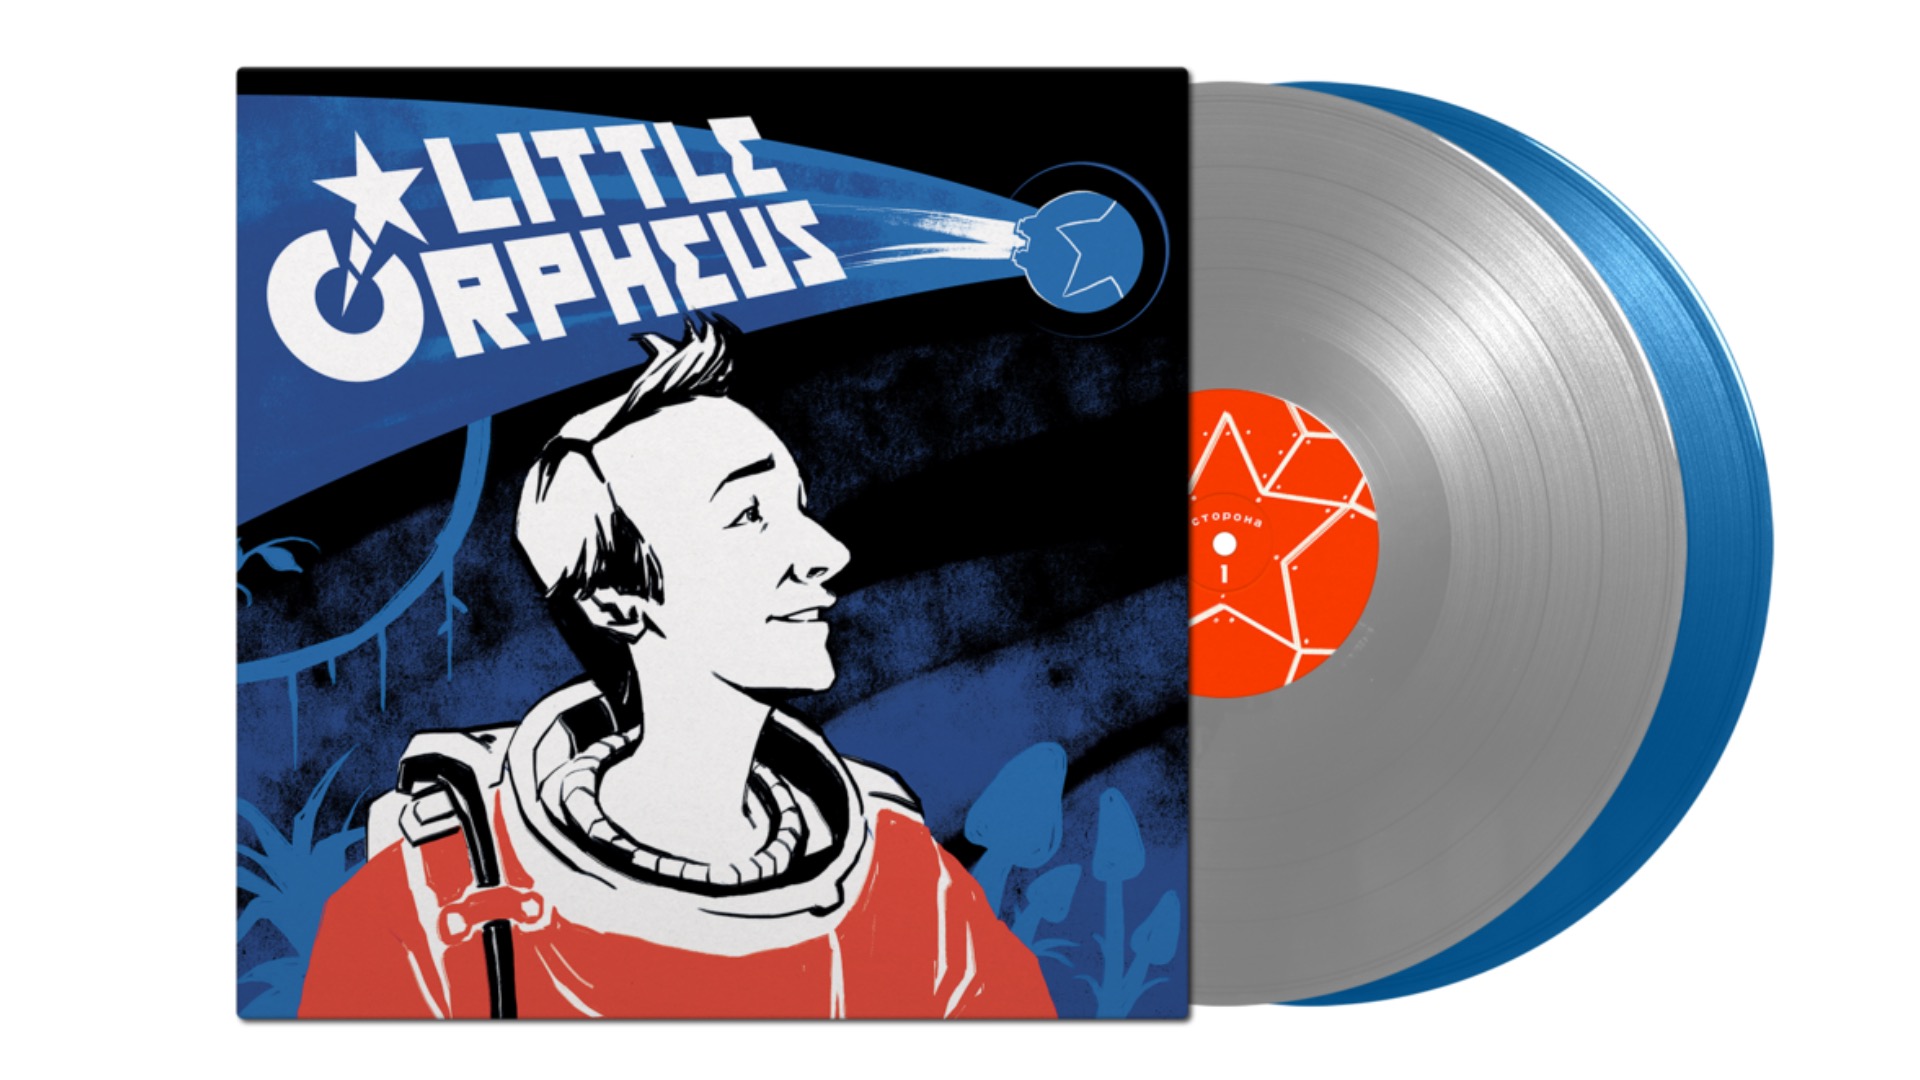 The Soundtrack to ‘Little Orpheus’ on Apple Arcade from The Chinese Room Is Getting a Vinyl Release This November with Pre-Orders Now Live